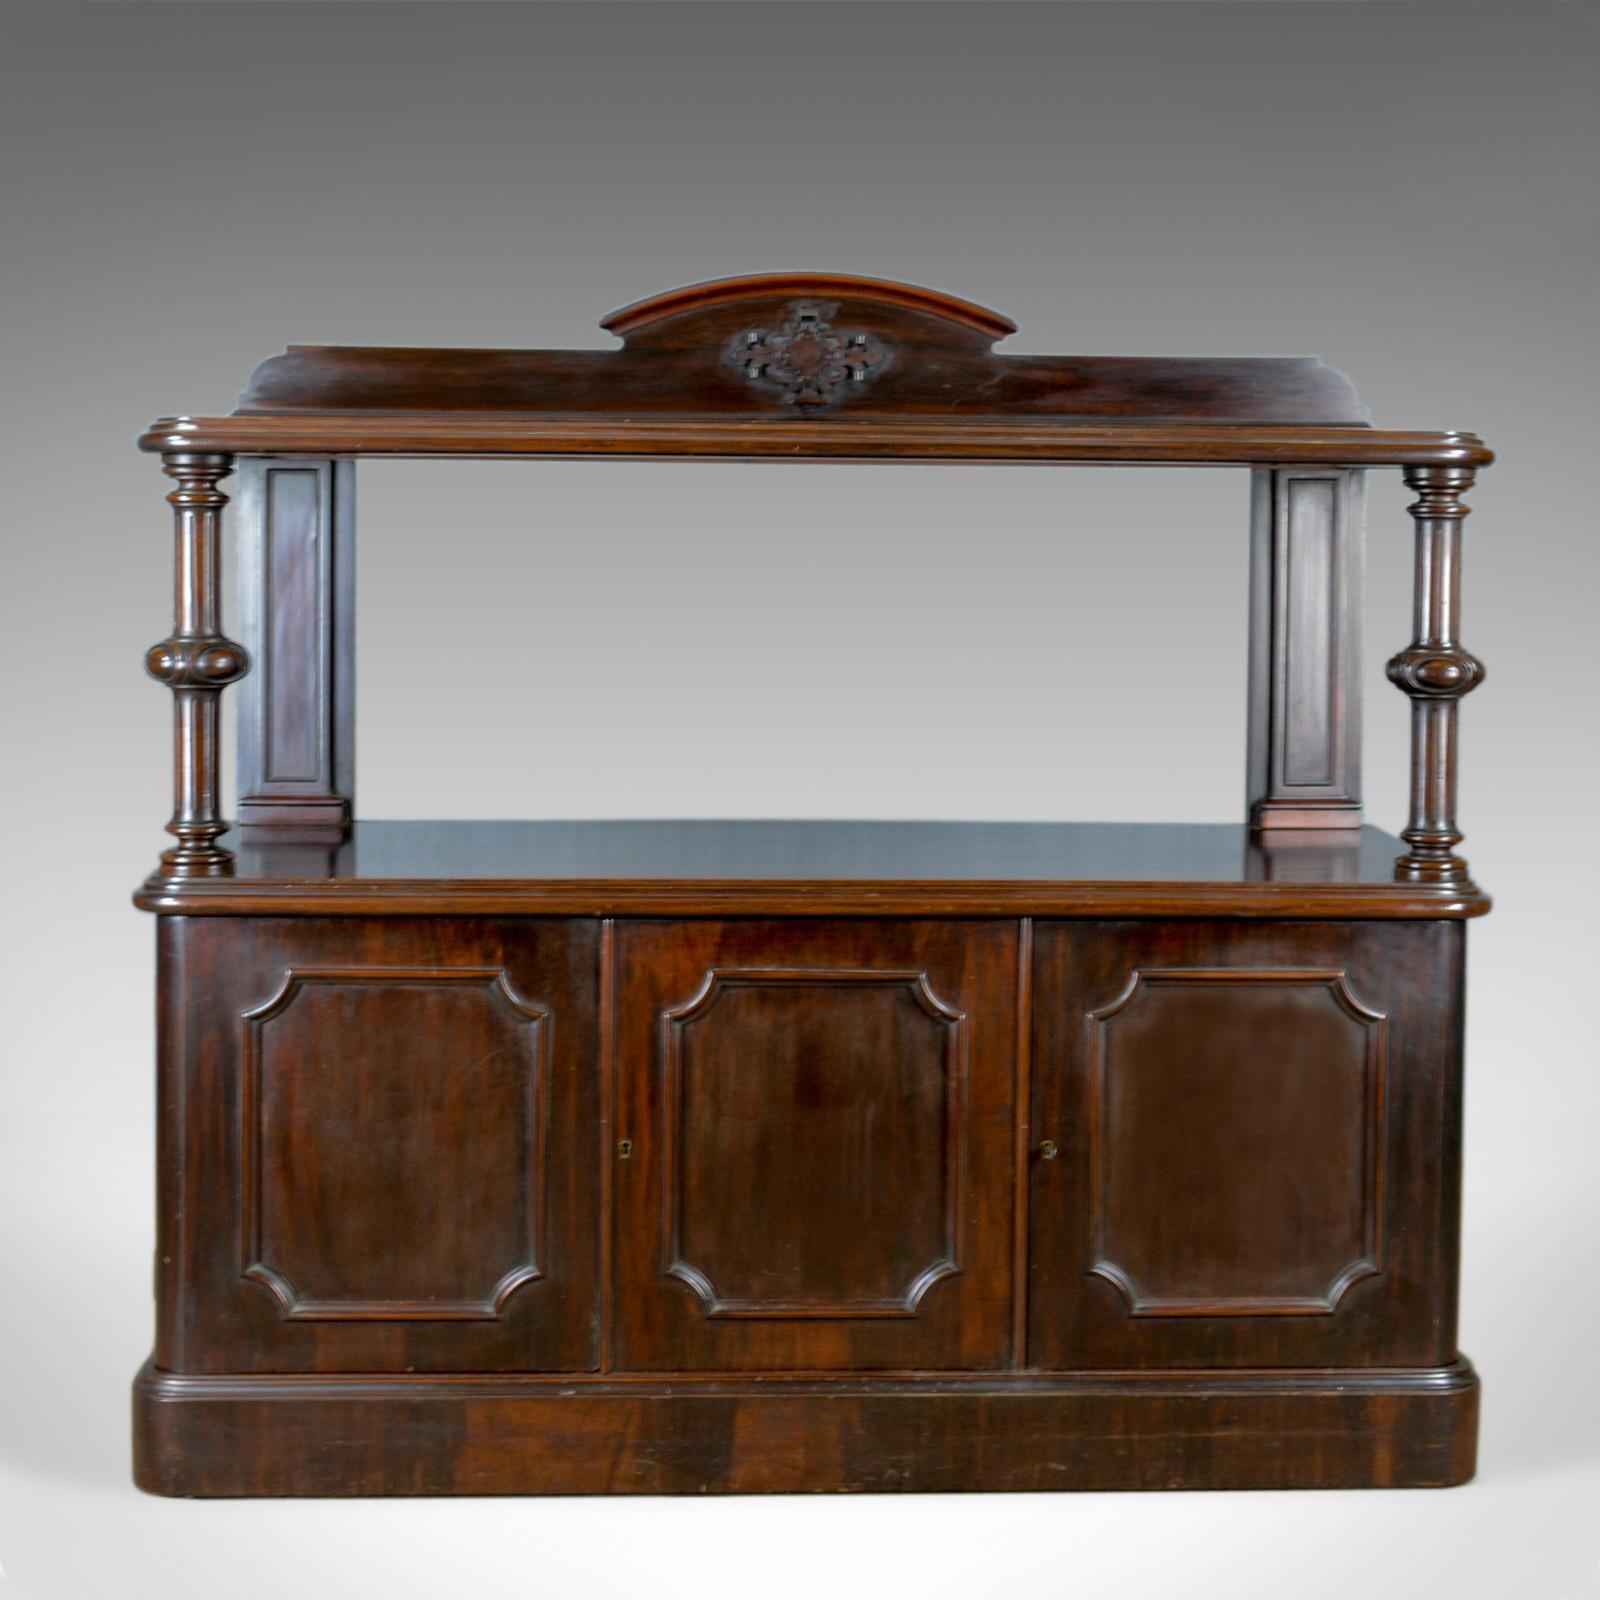 This is an antique buffet sideboard, an English, Victorian, mahogany server dating to the late 19th century, circa 1880.

Charming English, Victorian cabinet presented in good condition
Deep rich tones to the mahogany with a wax polished